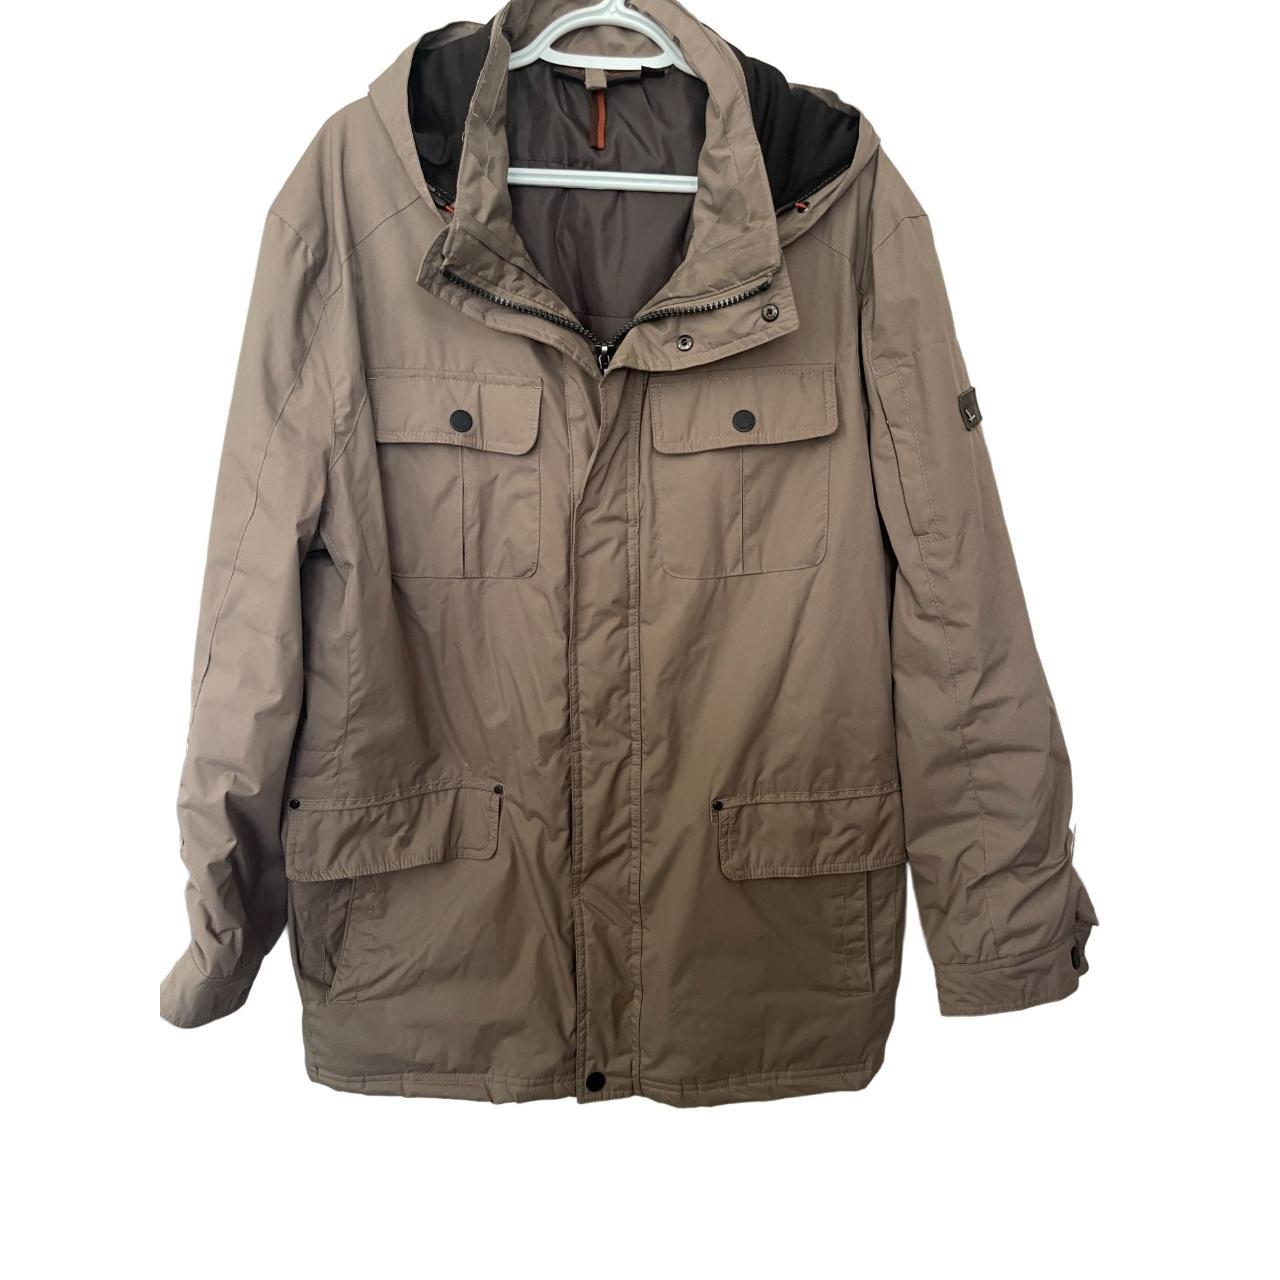 Product Image 1 - Mens heavy Anorak
Well-made, durable hardware
Missing